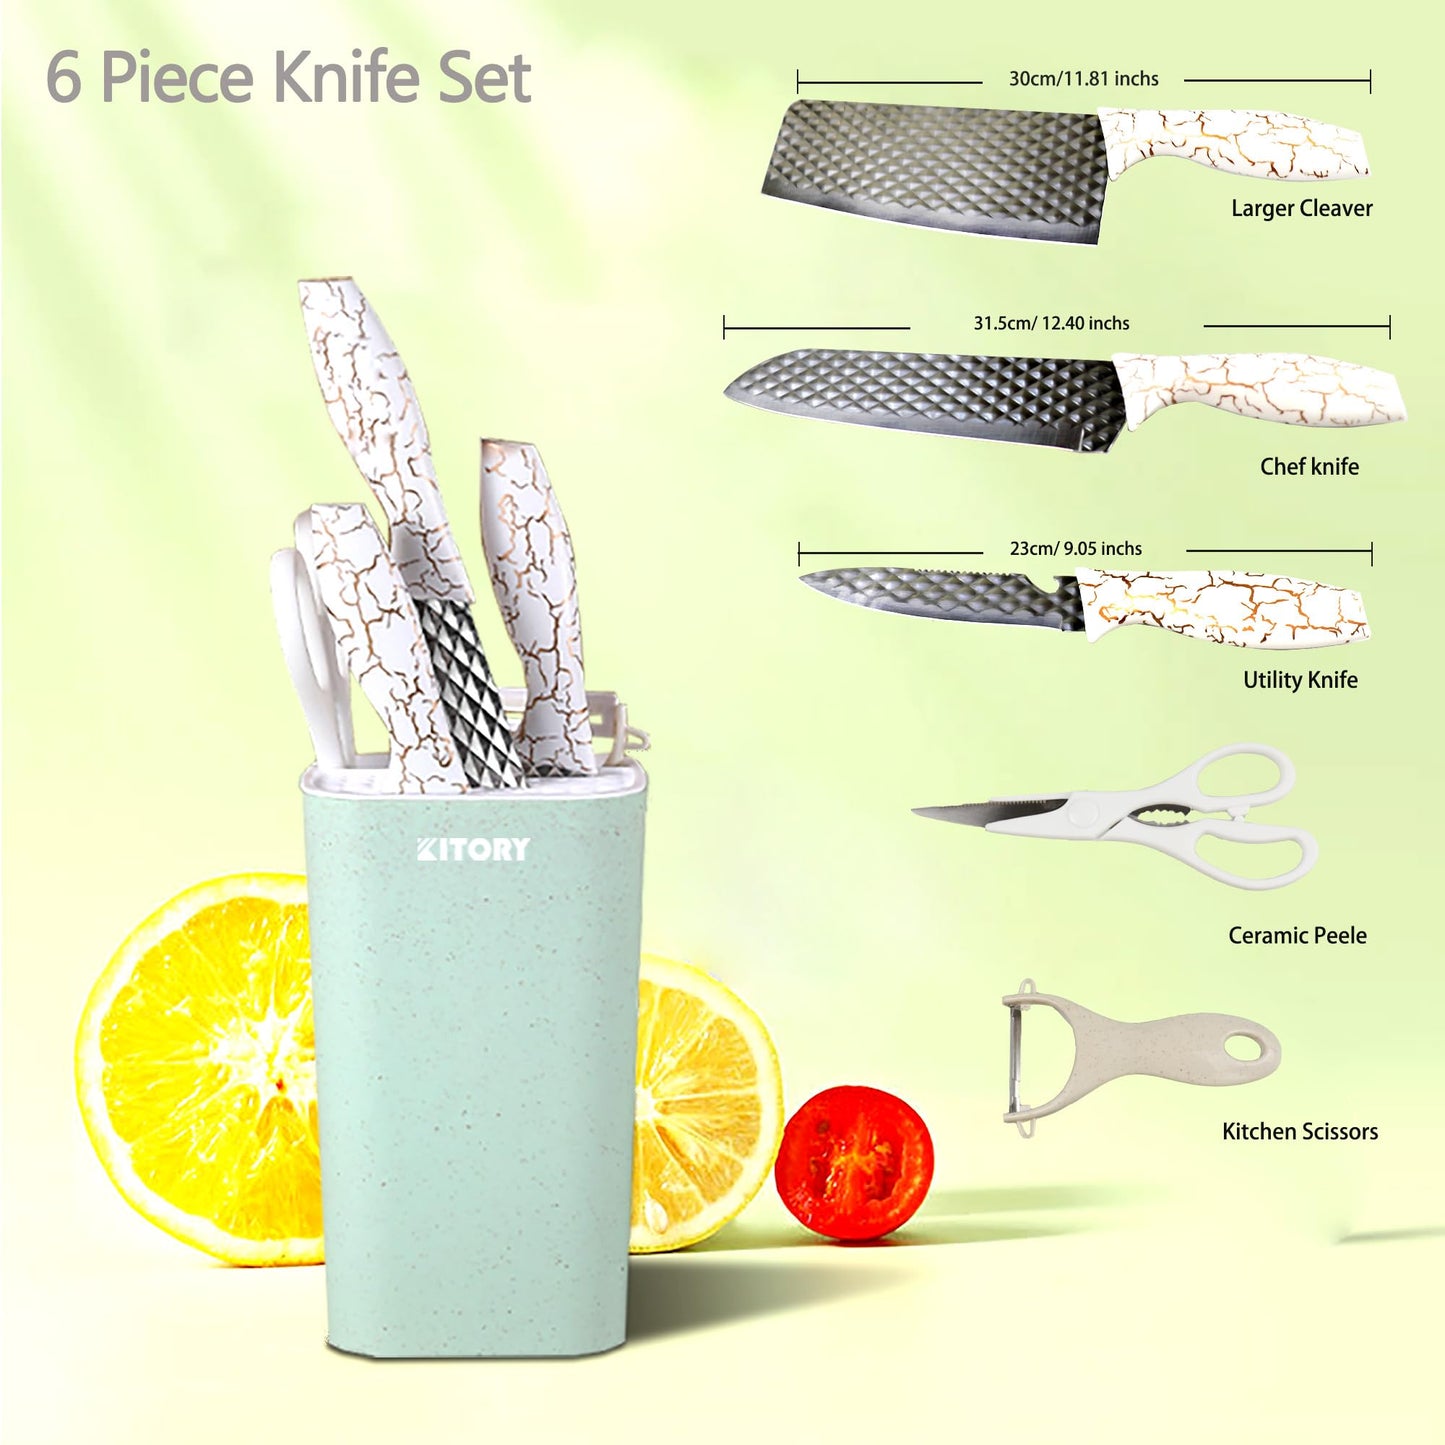 Kitory 6 Piece Cleaver Knife Set with Knife Block, White - KITORY Cutlery